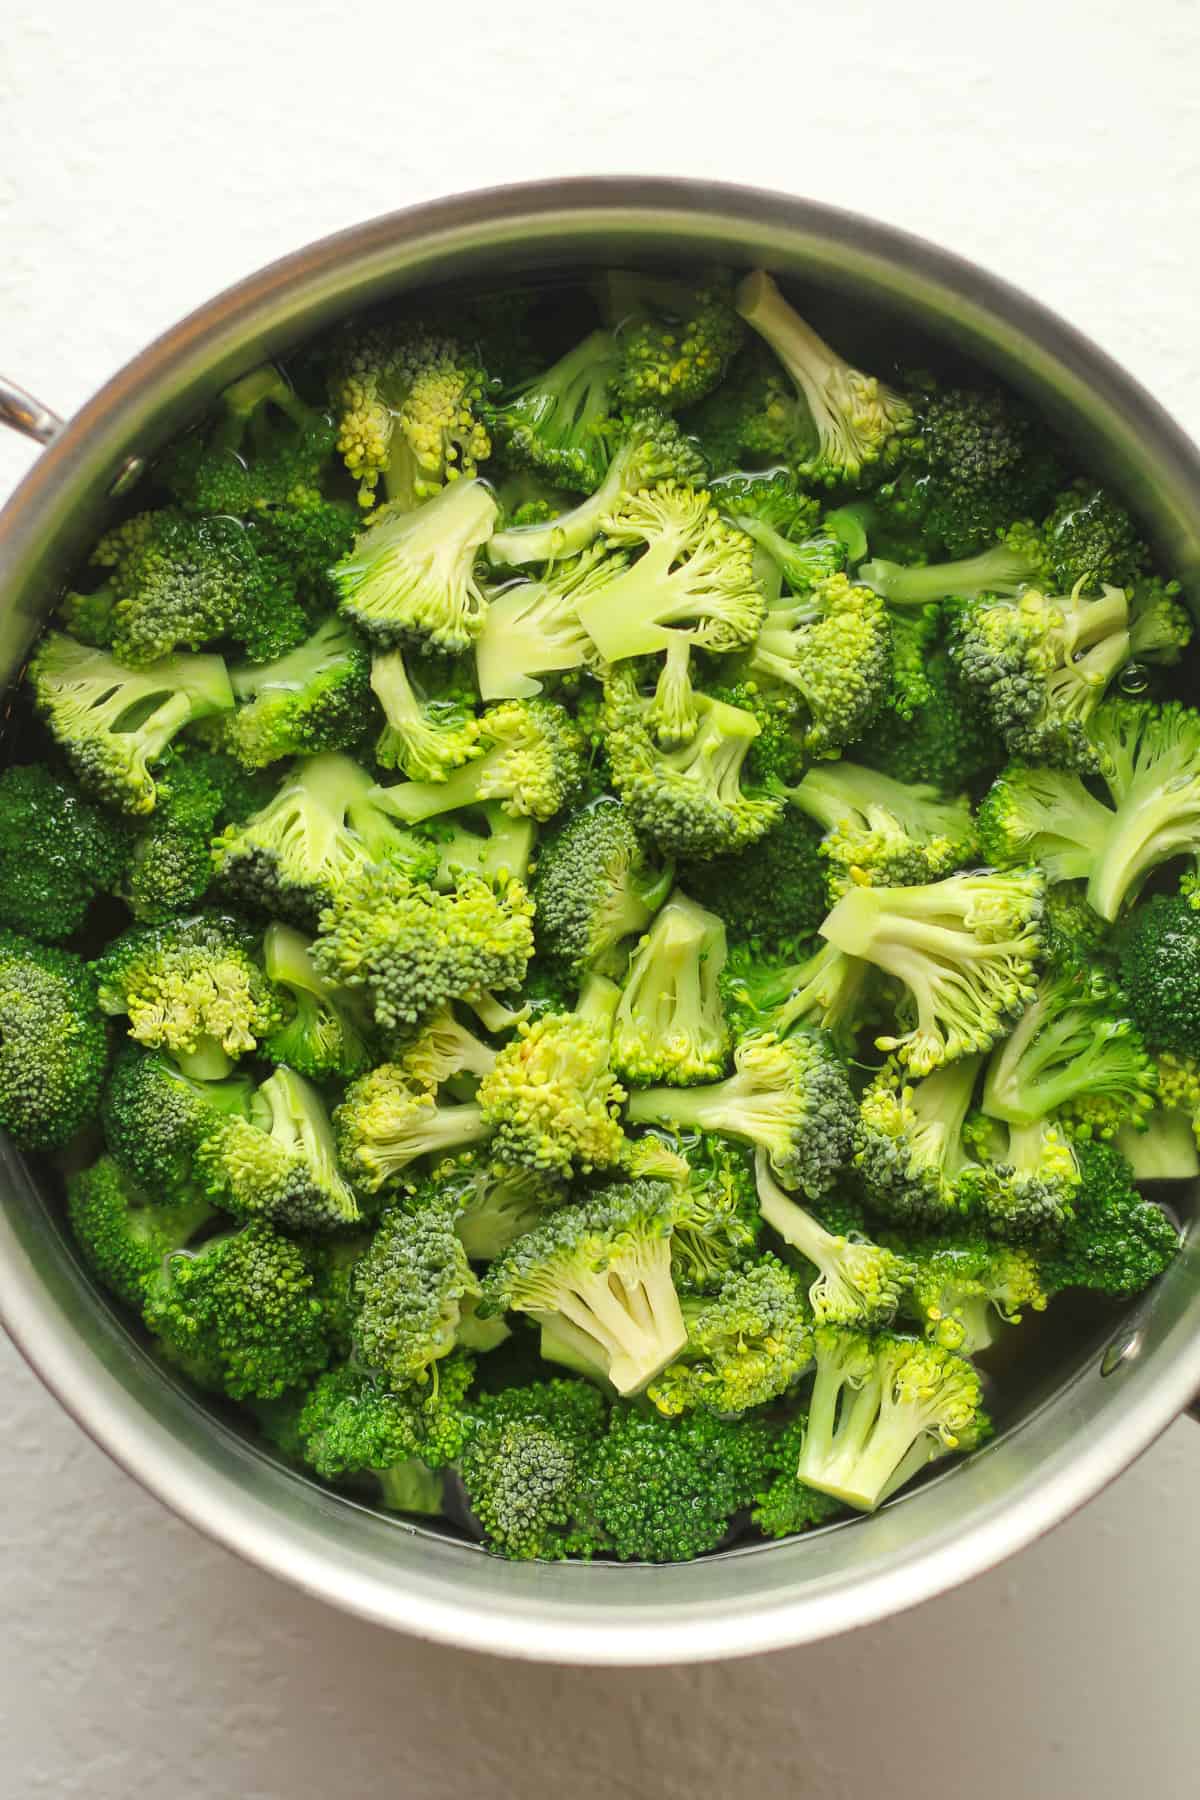 A stockpot of the pasta and broccoli in water.